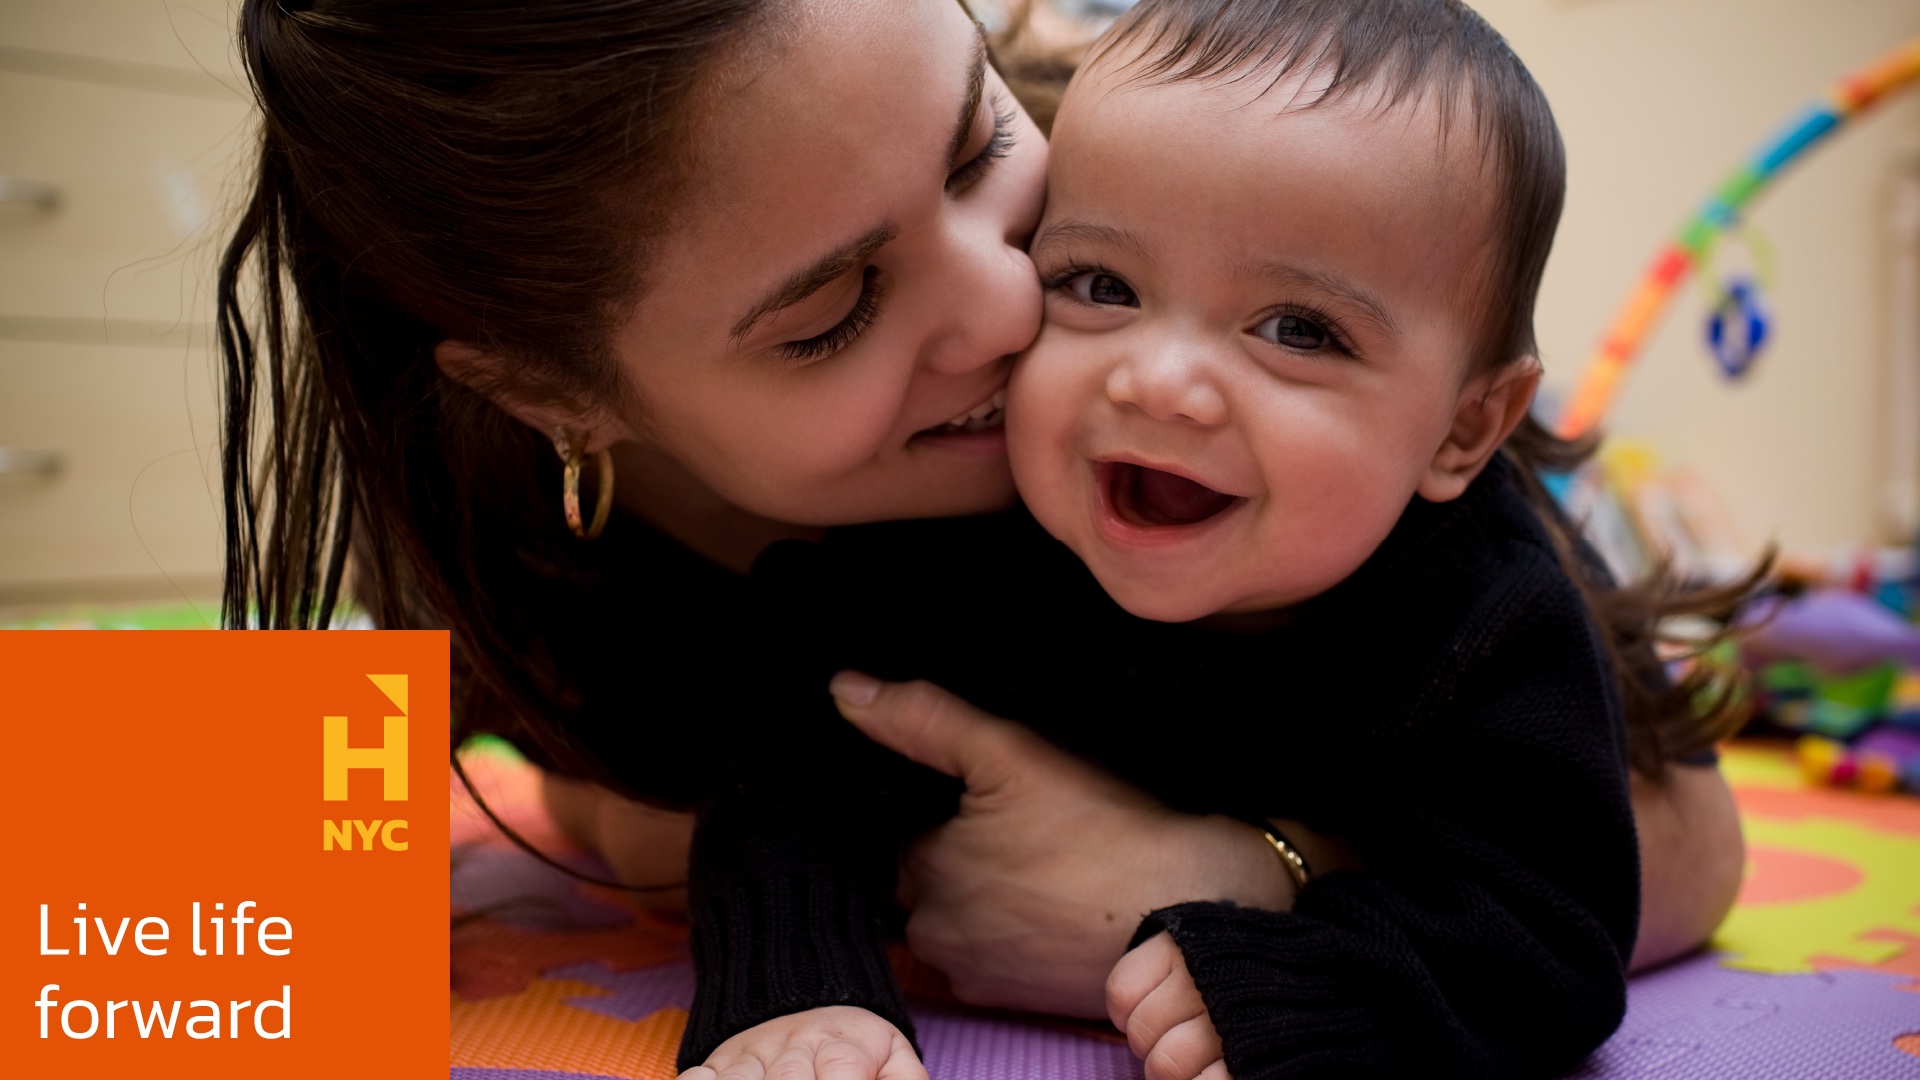 A young woman with a smiling baby in her arms, with the new branding system developed for West End Residences, applied in the lower left corner.